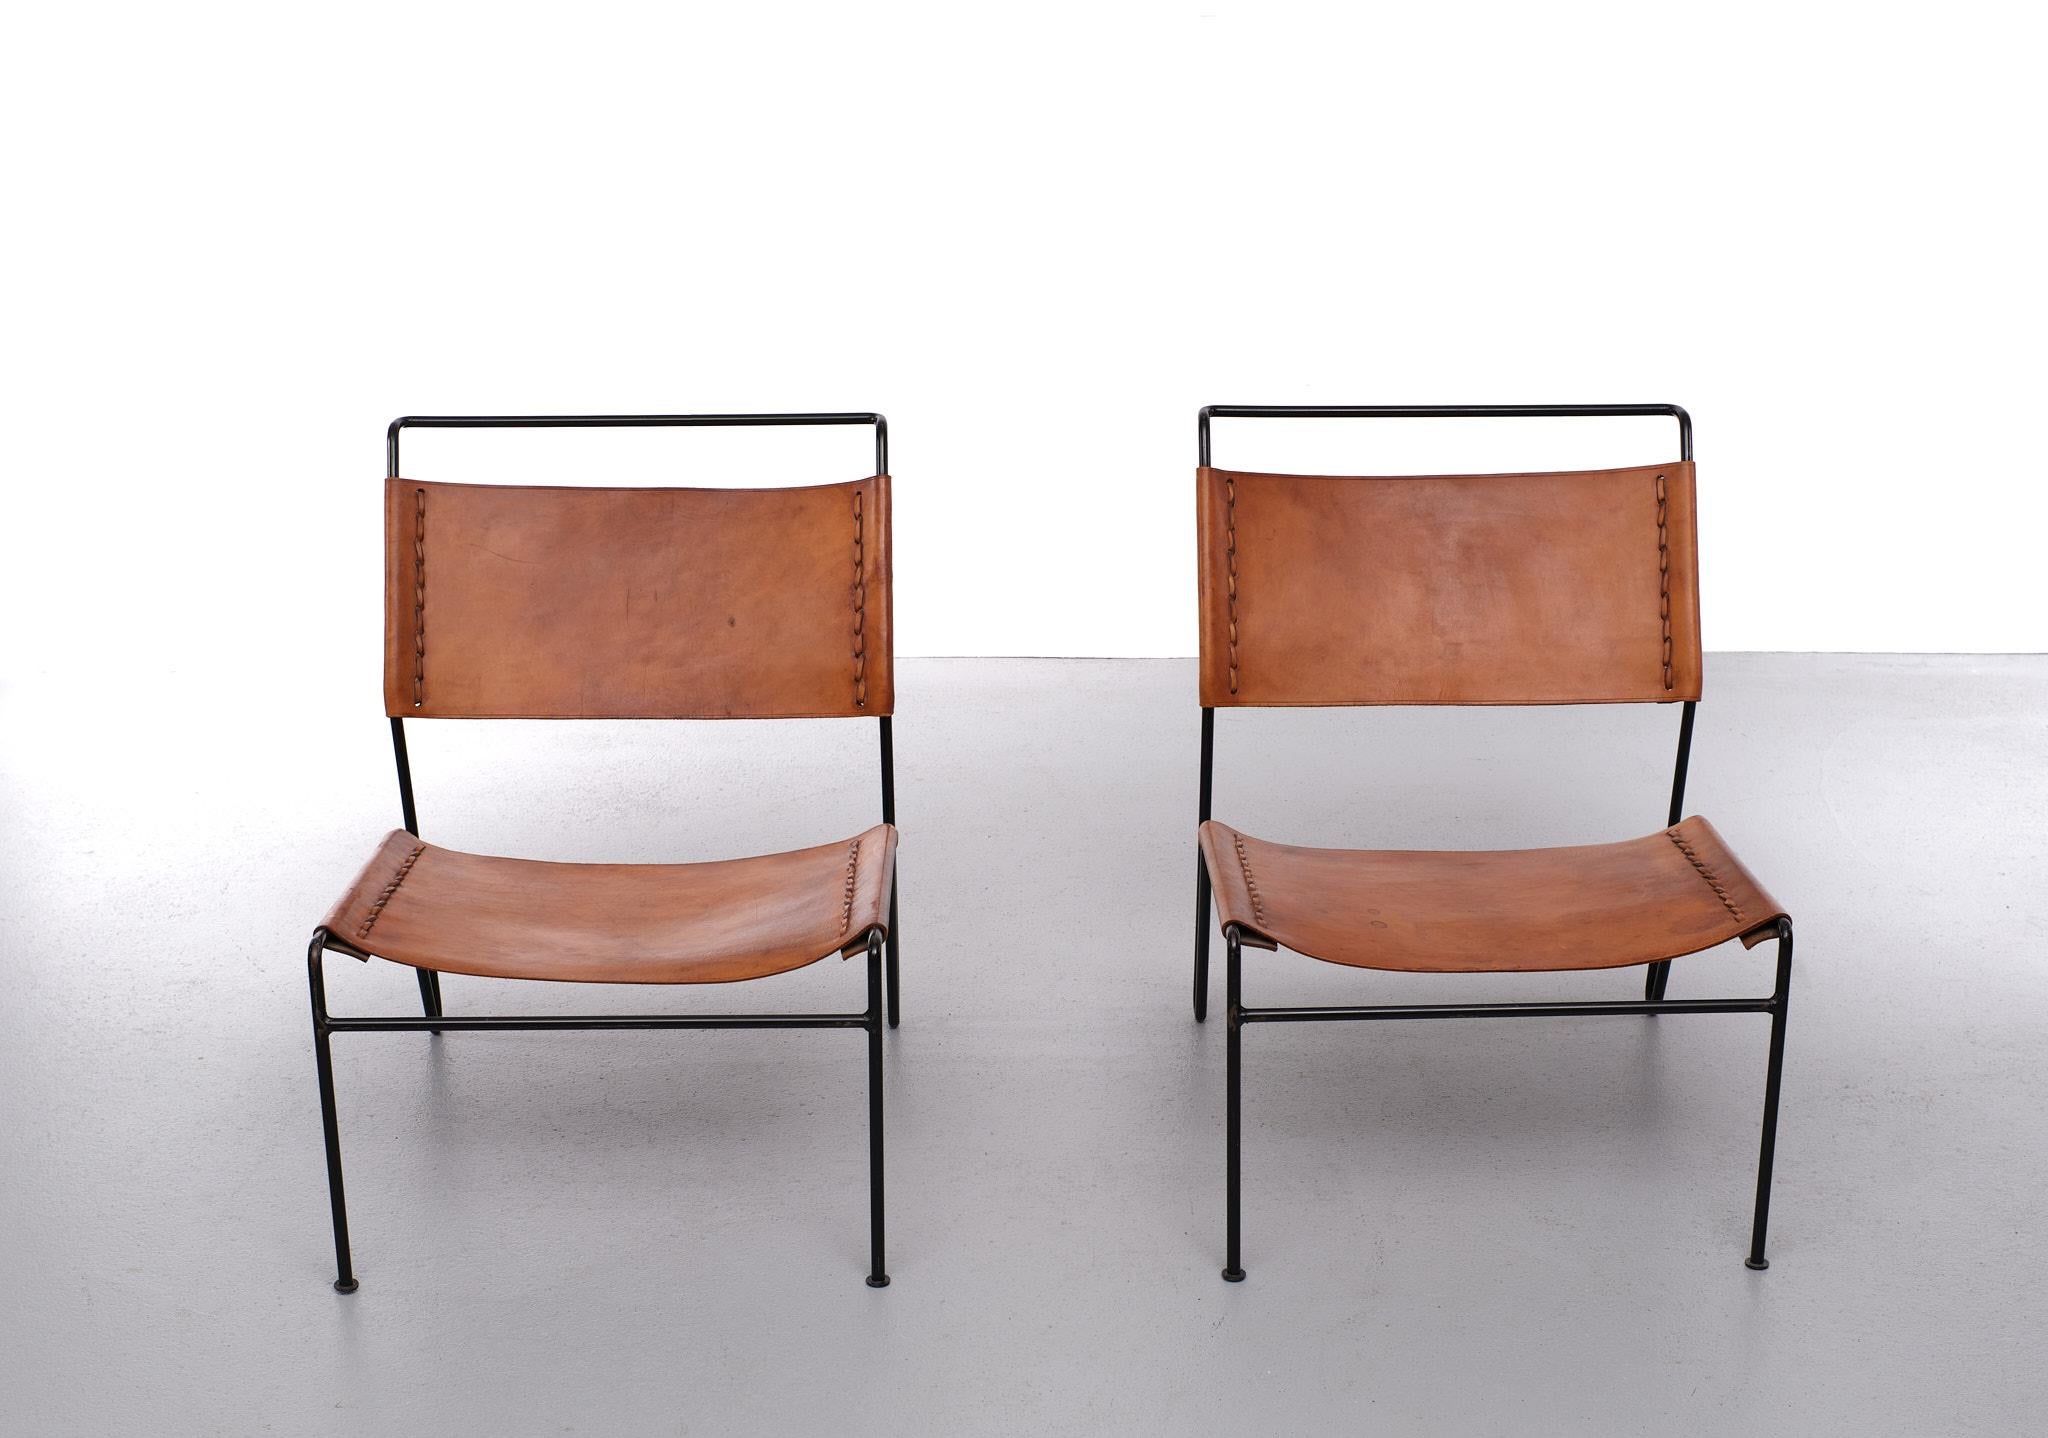 Mid-Century Modern Pair of A. Dolleman Chairs for Metz & Co, Netherlands, 1950 For Sale